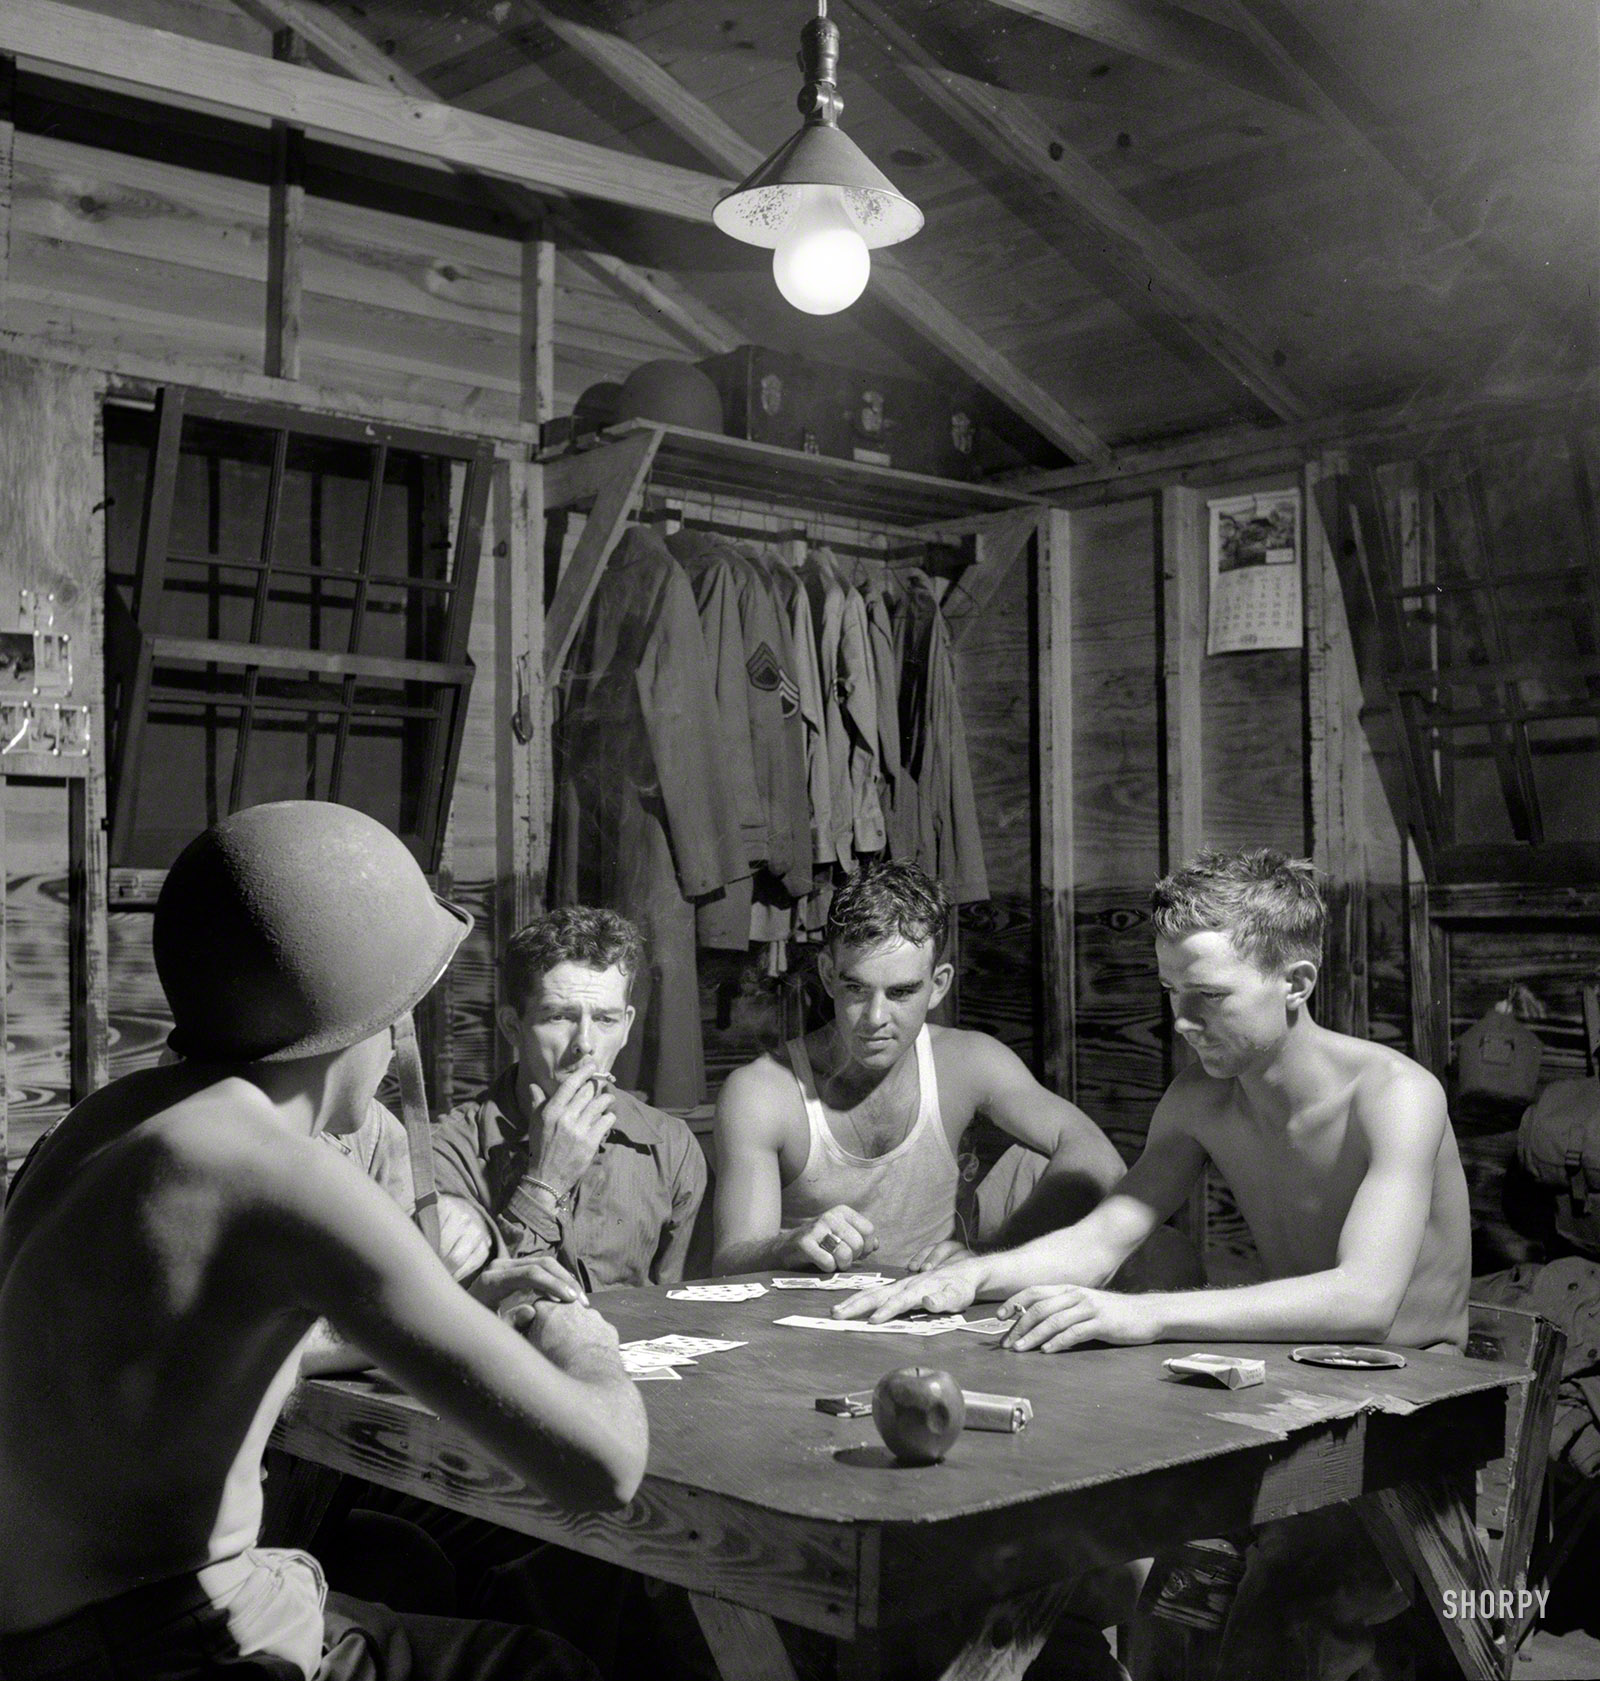 July 1943. Greenville, South Carolina. "Air Service Command. Men of the Quartermaster Truck Company of the 25th Service Group having a card game in one of the barracks." Stag counterpoint to the girls back home. Photo by Jack Delano for the Office of War Information. View full size.